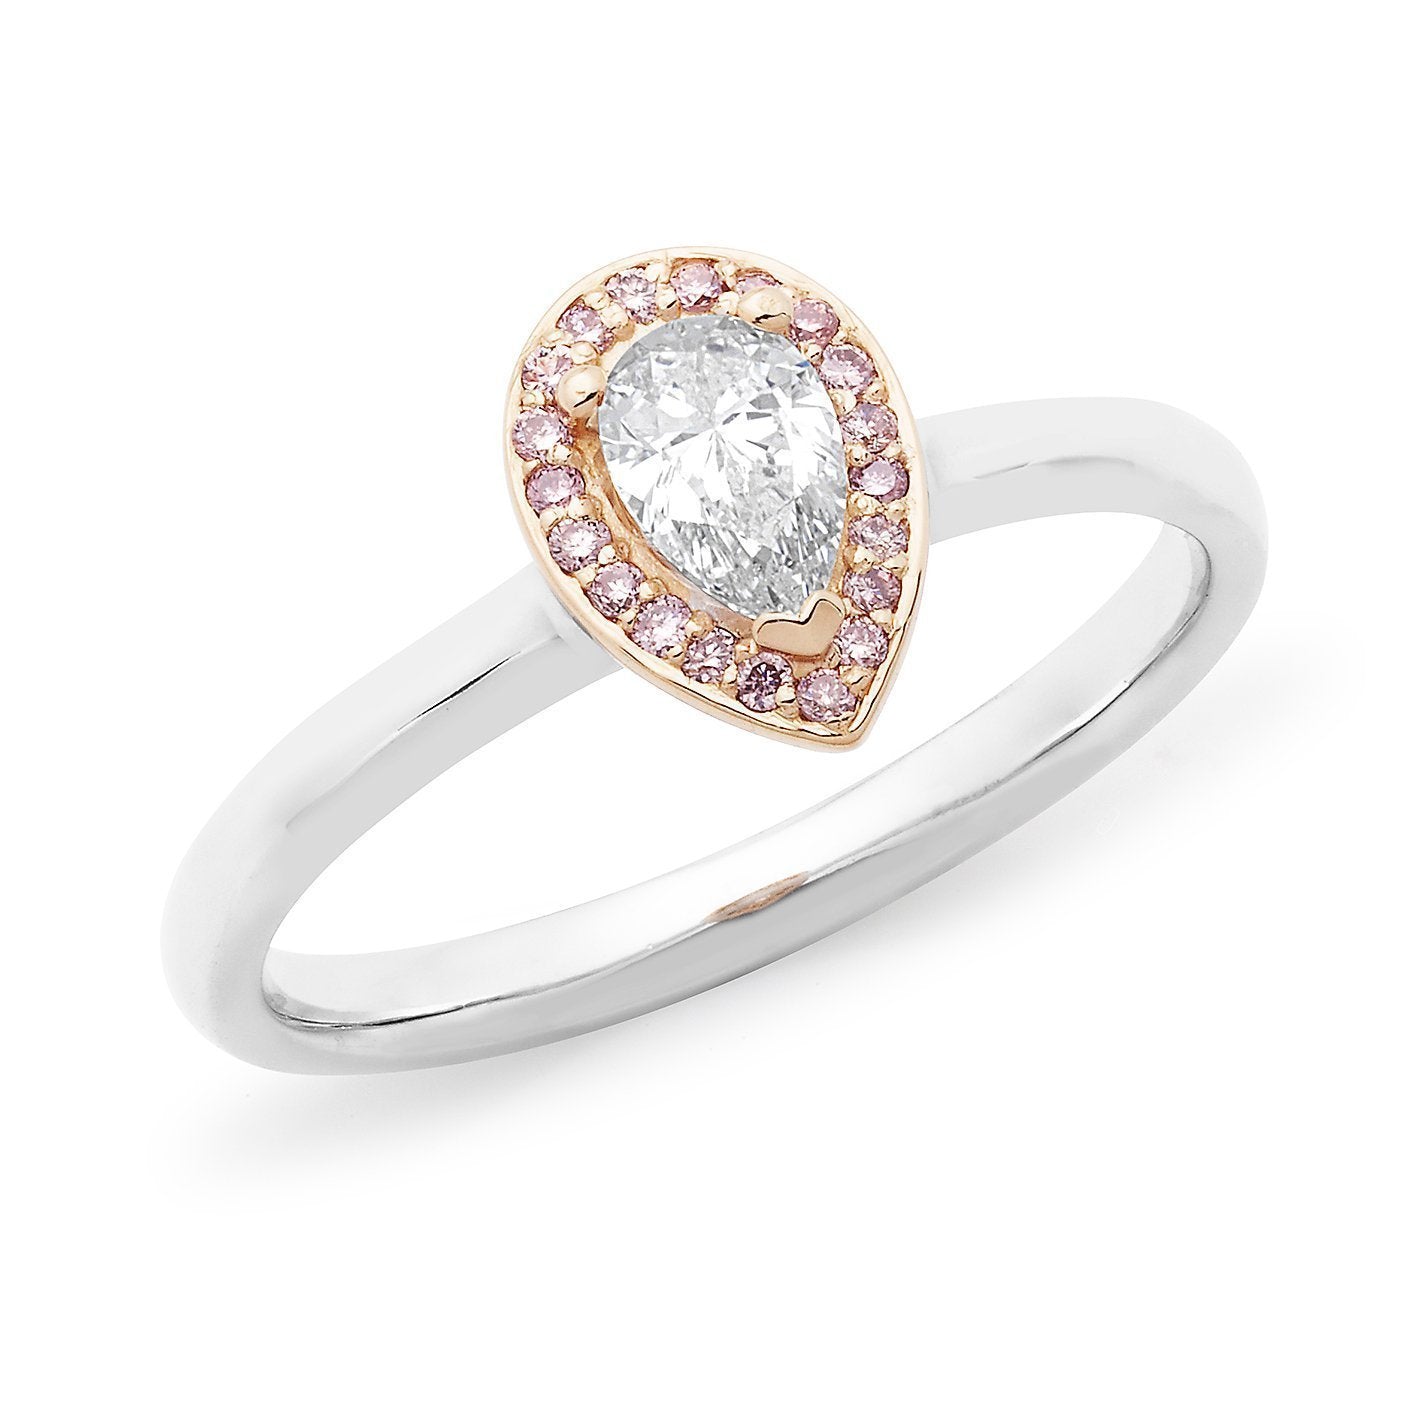 PINK CAVIAR 0.40ct Pink & White Pear Cut Diamond Halo Engagement Ring in 18ct White & Rose Gold